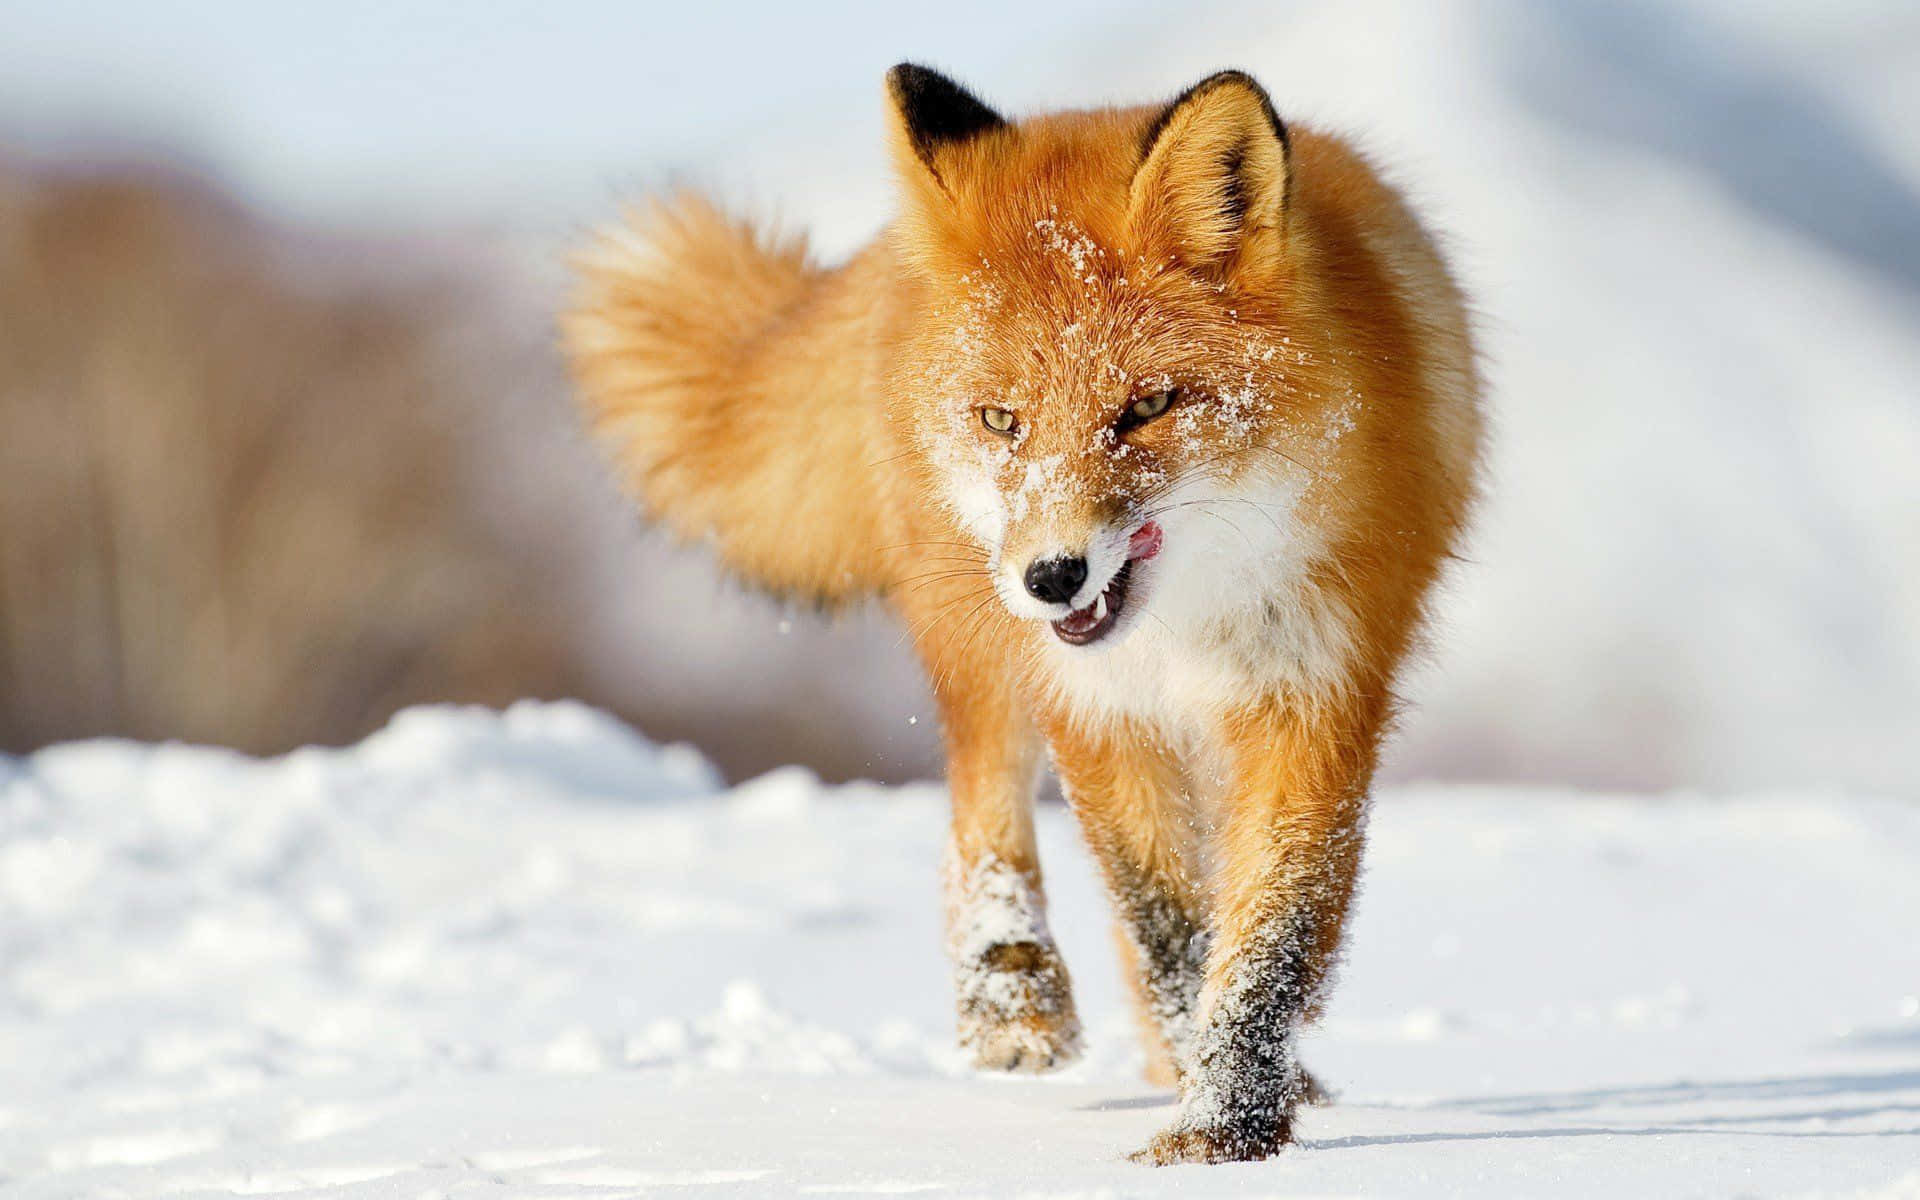 A Red Fox with a Playful Attitude